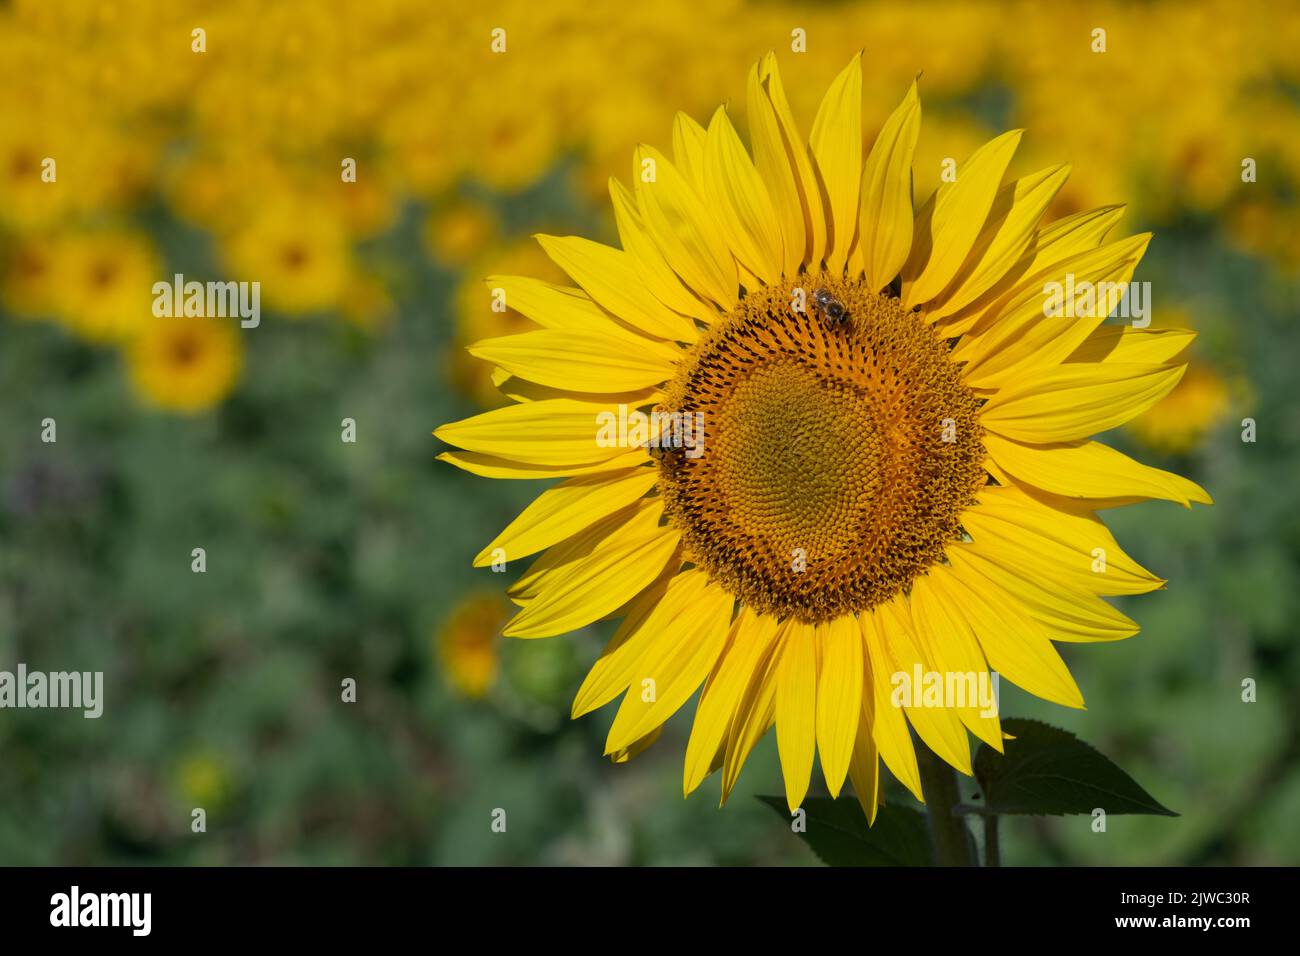 Close-up of a yellow and bright sunflower in the field. There are bees on the flower. Lots of sunflowers in the background. Stock Photo